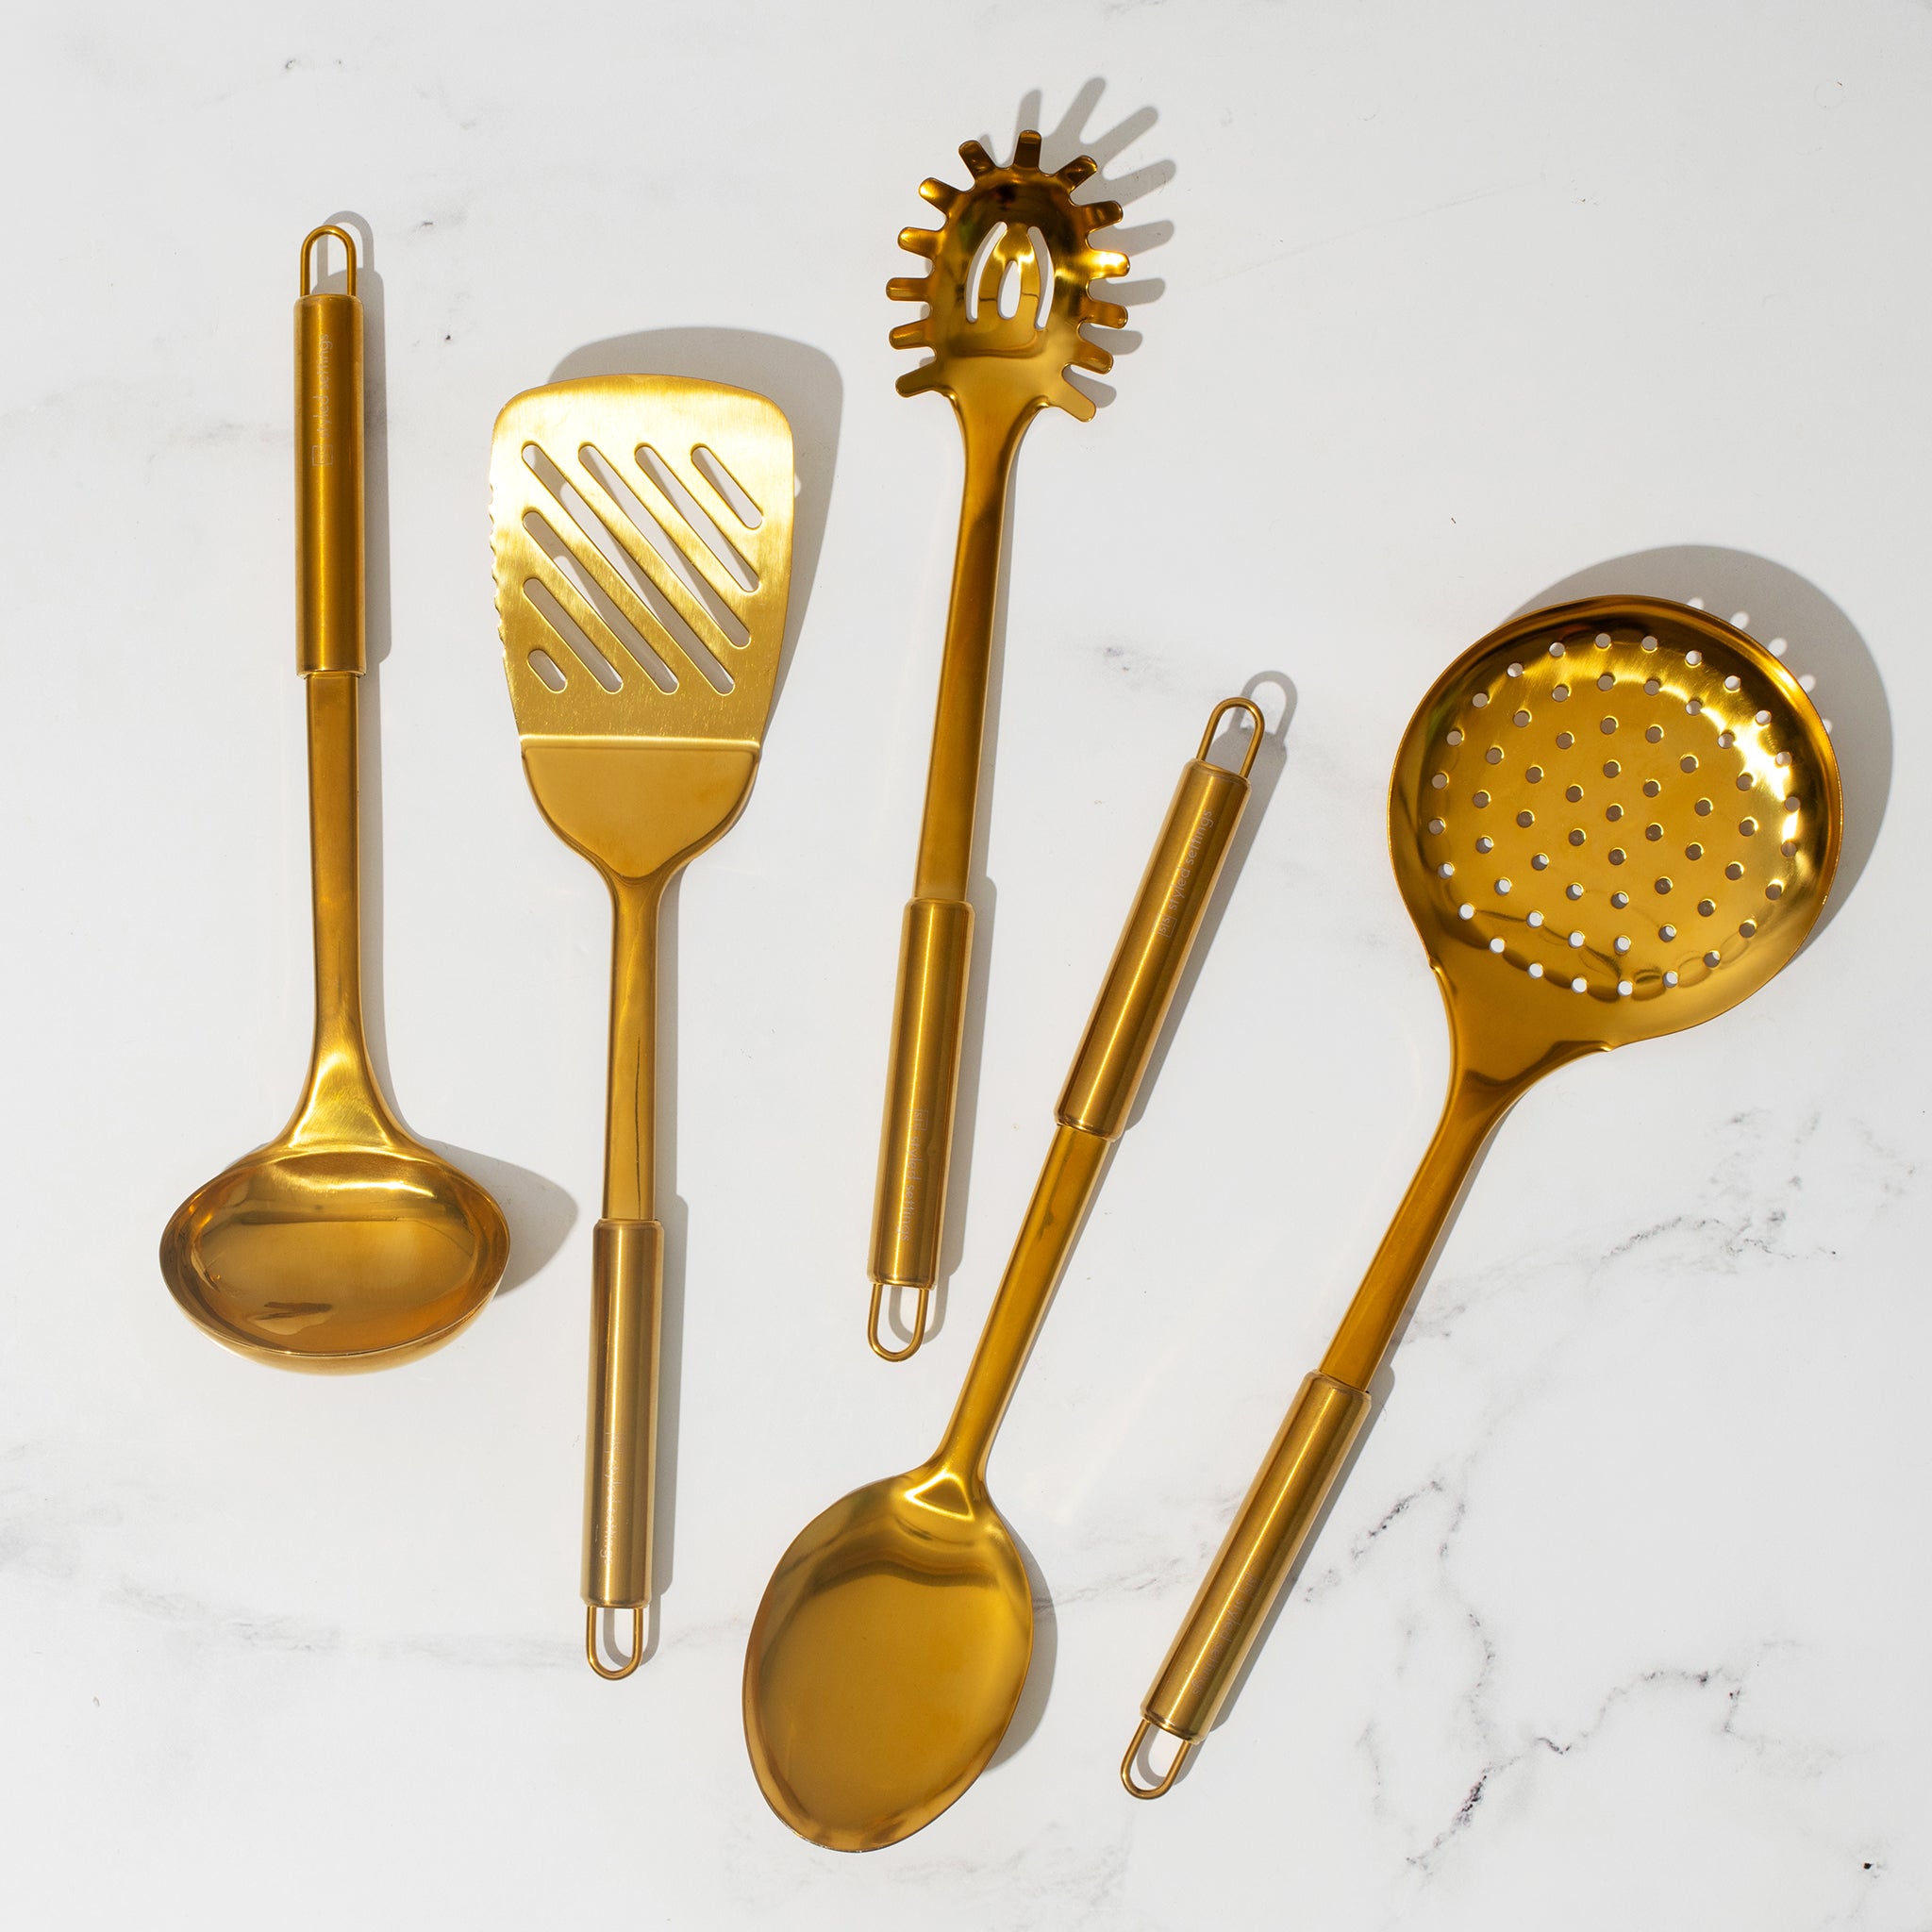 Styled Settings Gold Stainless Steel Cooking Utensils Set